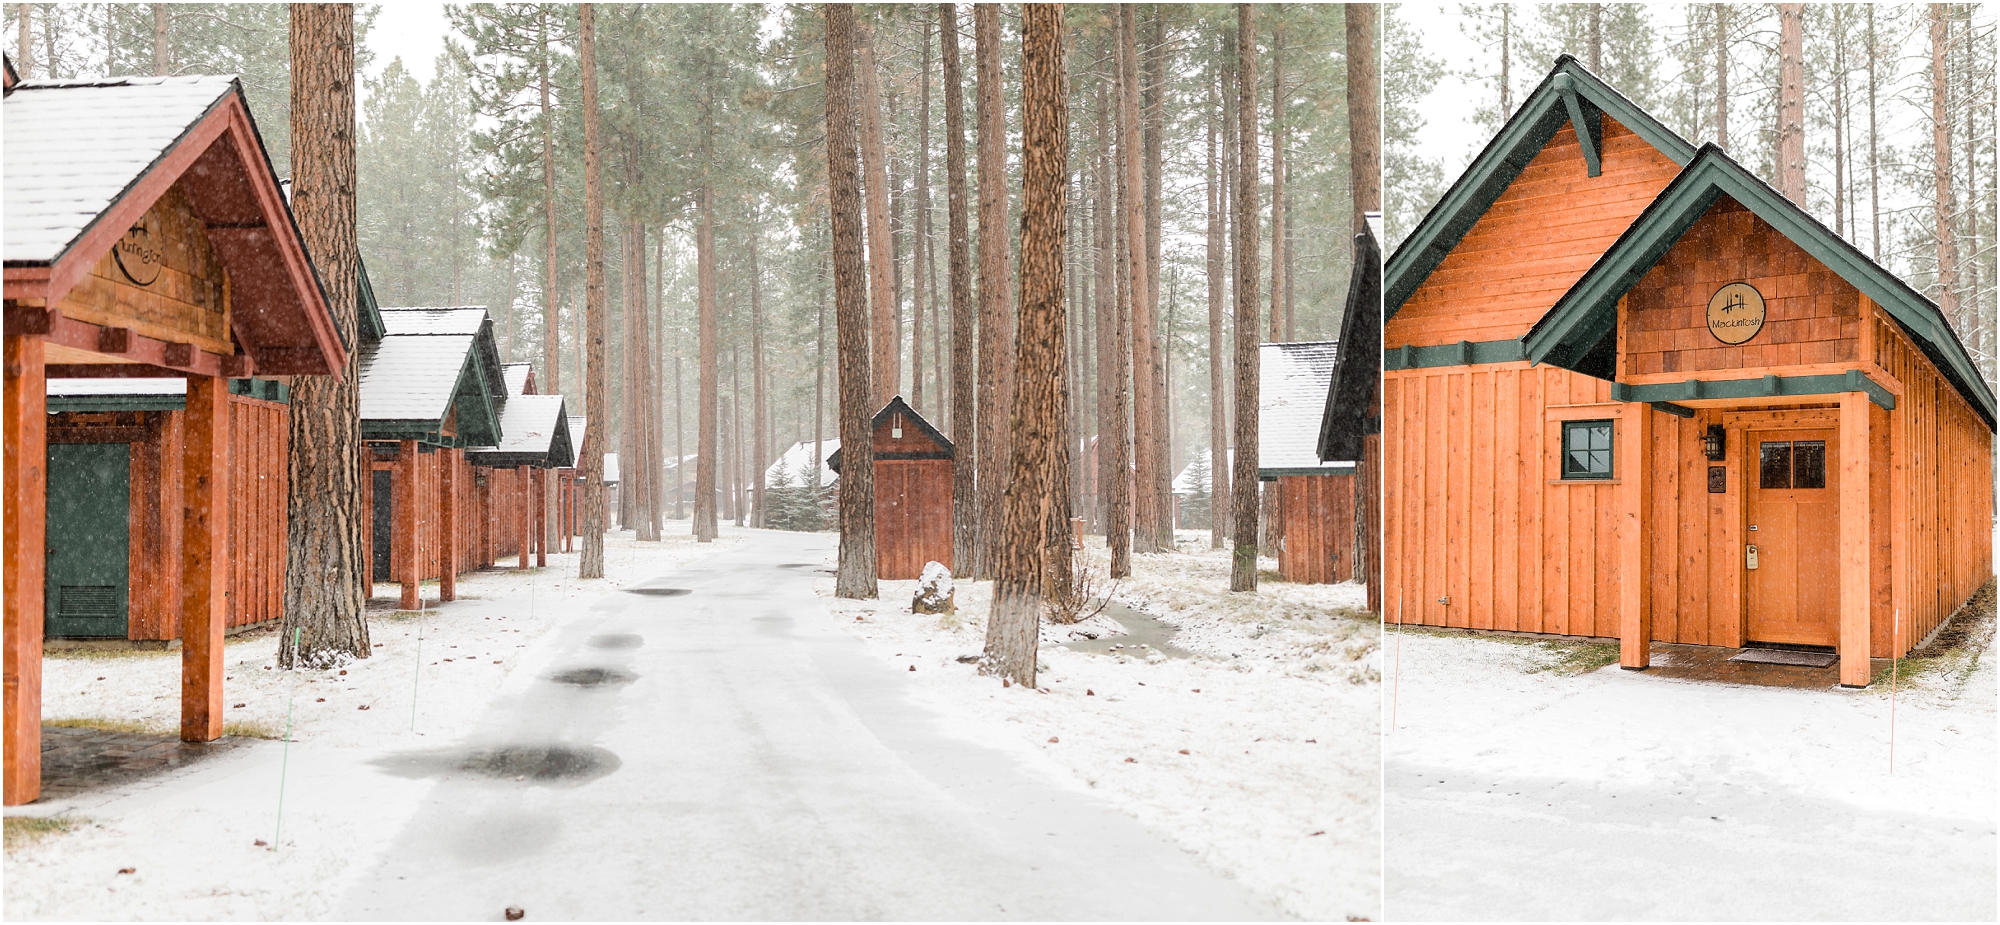 A dusting of white snow blankets the pine trees and pathways between the orange pine cabins at Five Pine Lodge in Sisters for this Central Oregon Winter Elopement. | Erica Swantek Photography